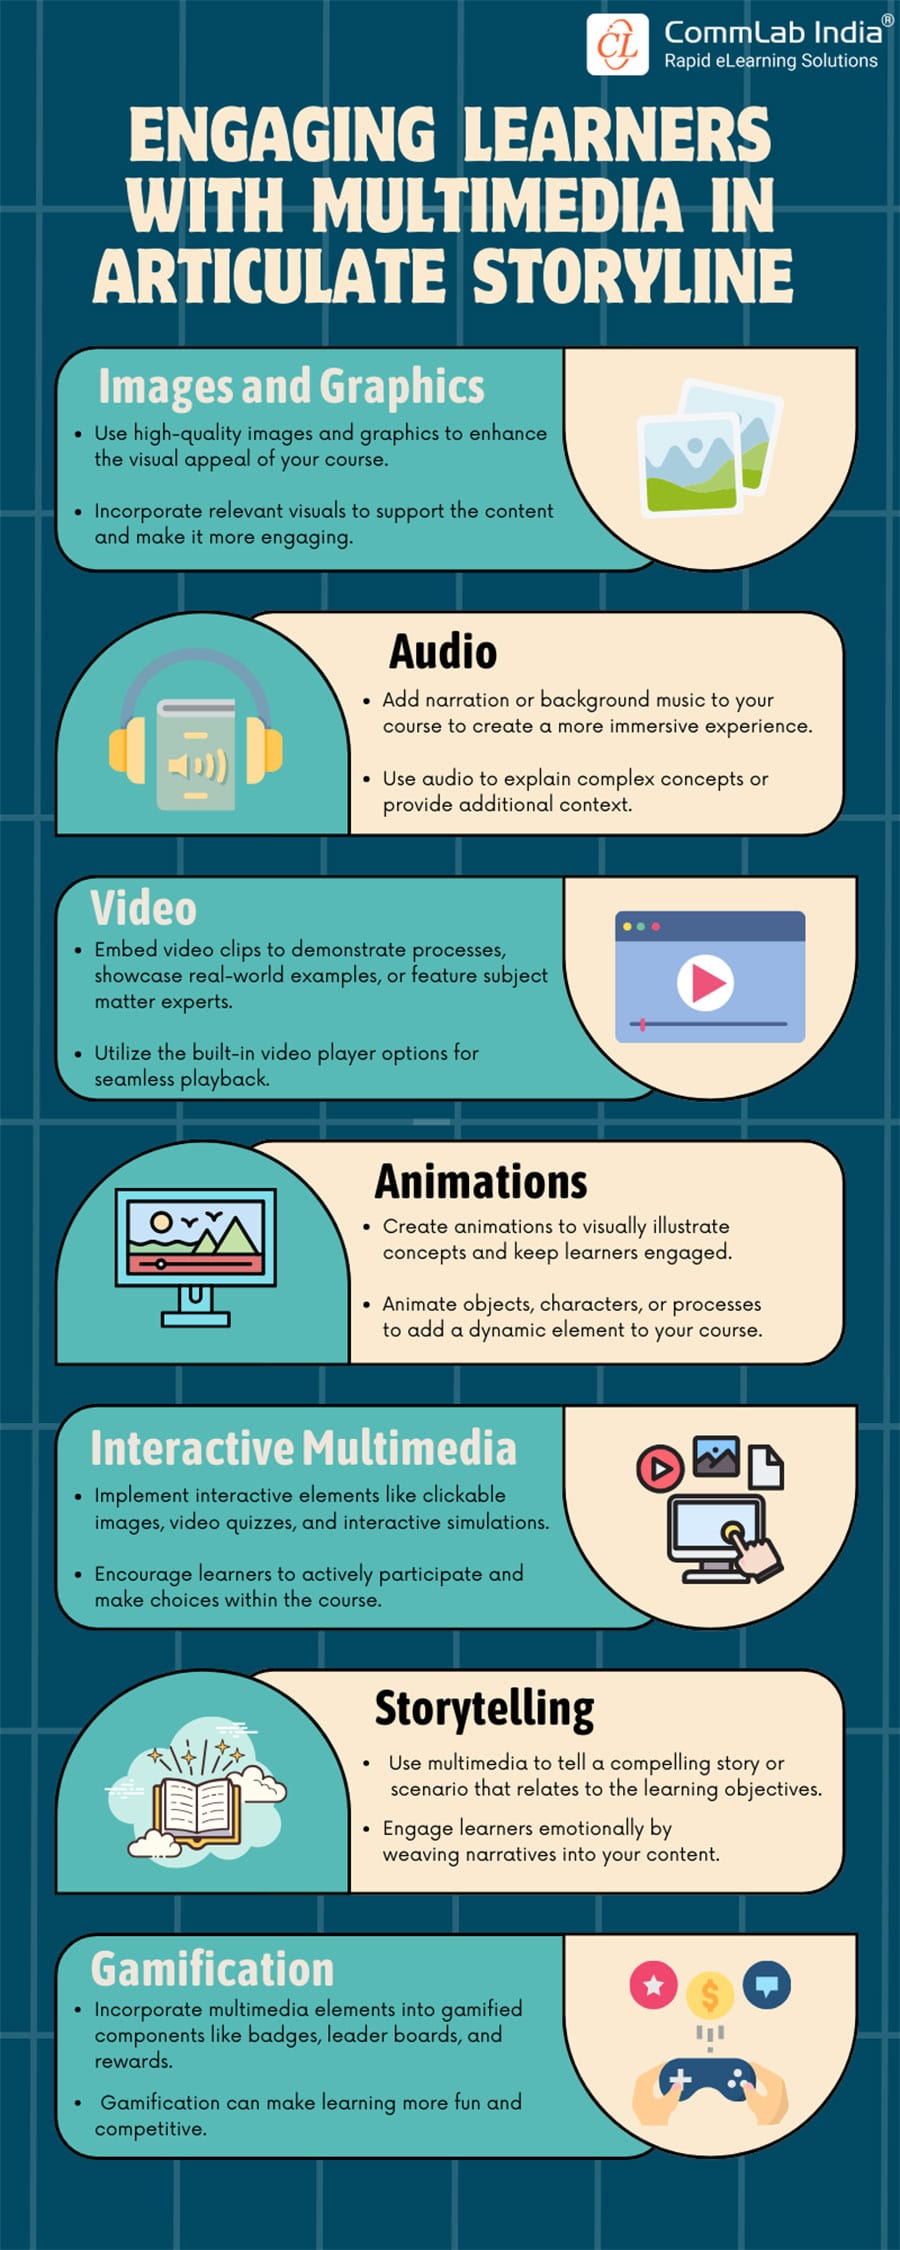 Engaging Learners with Multimedia in Articulate Storyline